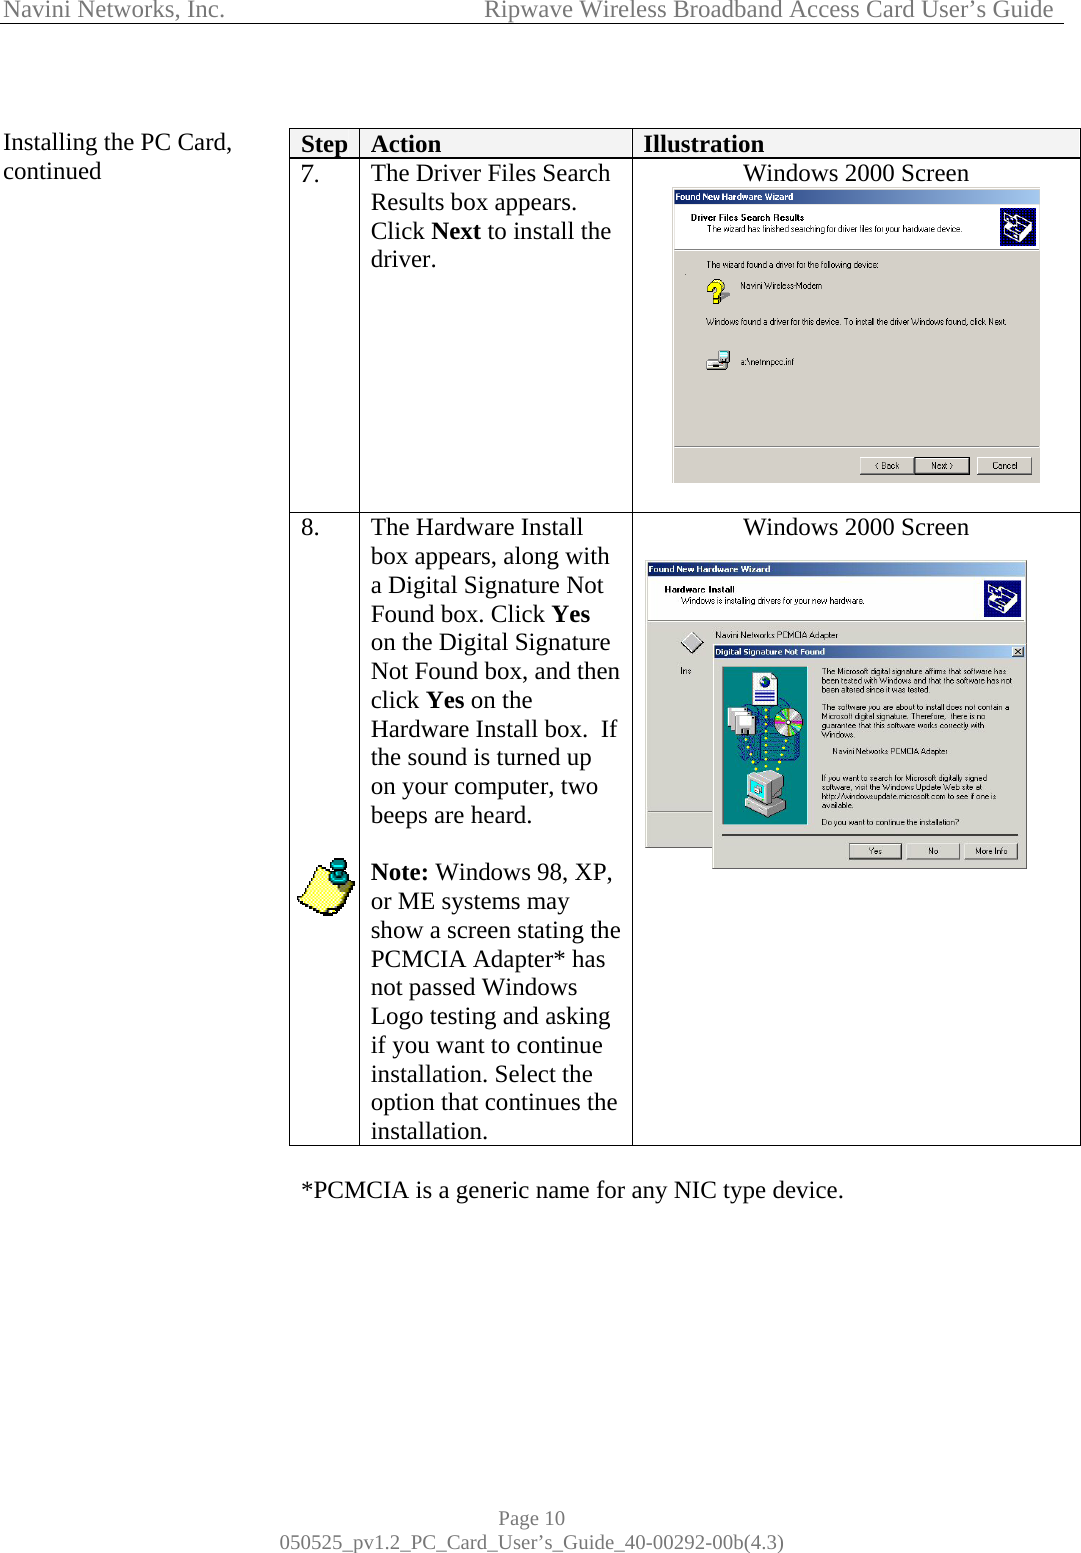 Navini Networks, Inc.            Ripwave Wireless Broadband Access Card User’s Guide Page 10 050525_pv1.2_PC_Card_User’s_Guide_40-00292-00b(4.3)  Installing the PC Card, continued                                             Step  Action  Illustration  7.  The Driver Files Search Results box appears. Click Next to install the driver. Windows 2000 Screen   8.  The Hardware Install box appears, along with a Digital Signature Not Found box. Click Yes on the Digital Signature Not Found box, and then click Yes on the Hardware Install box.  If the sound is turned up on your computer, two beeps are heard.  Note: Windows 98, XP, or ME systems may show a screen stating the PCMCIA Adapter* has not passed Windows Logo testing and asking if you want to continue installation. Select the option that continues the installation. Windows 2000 Screen   *PCMCIA is a generic name for any NIC type device.       